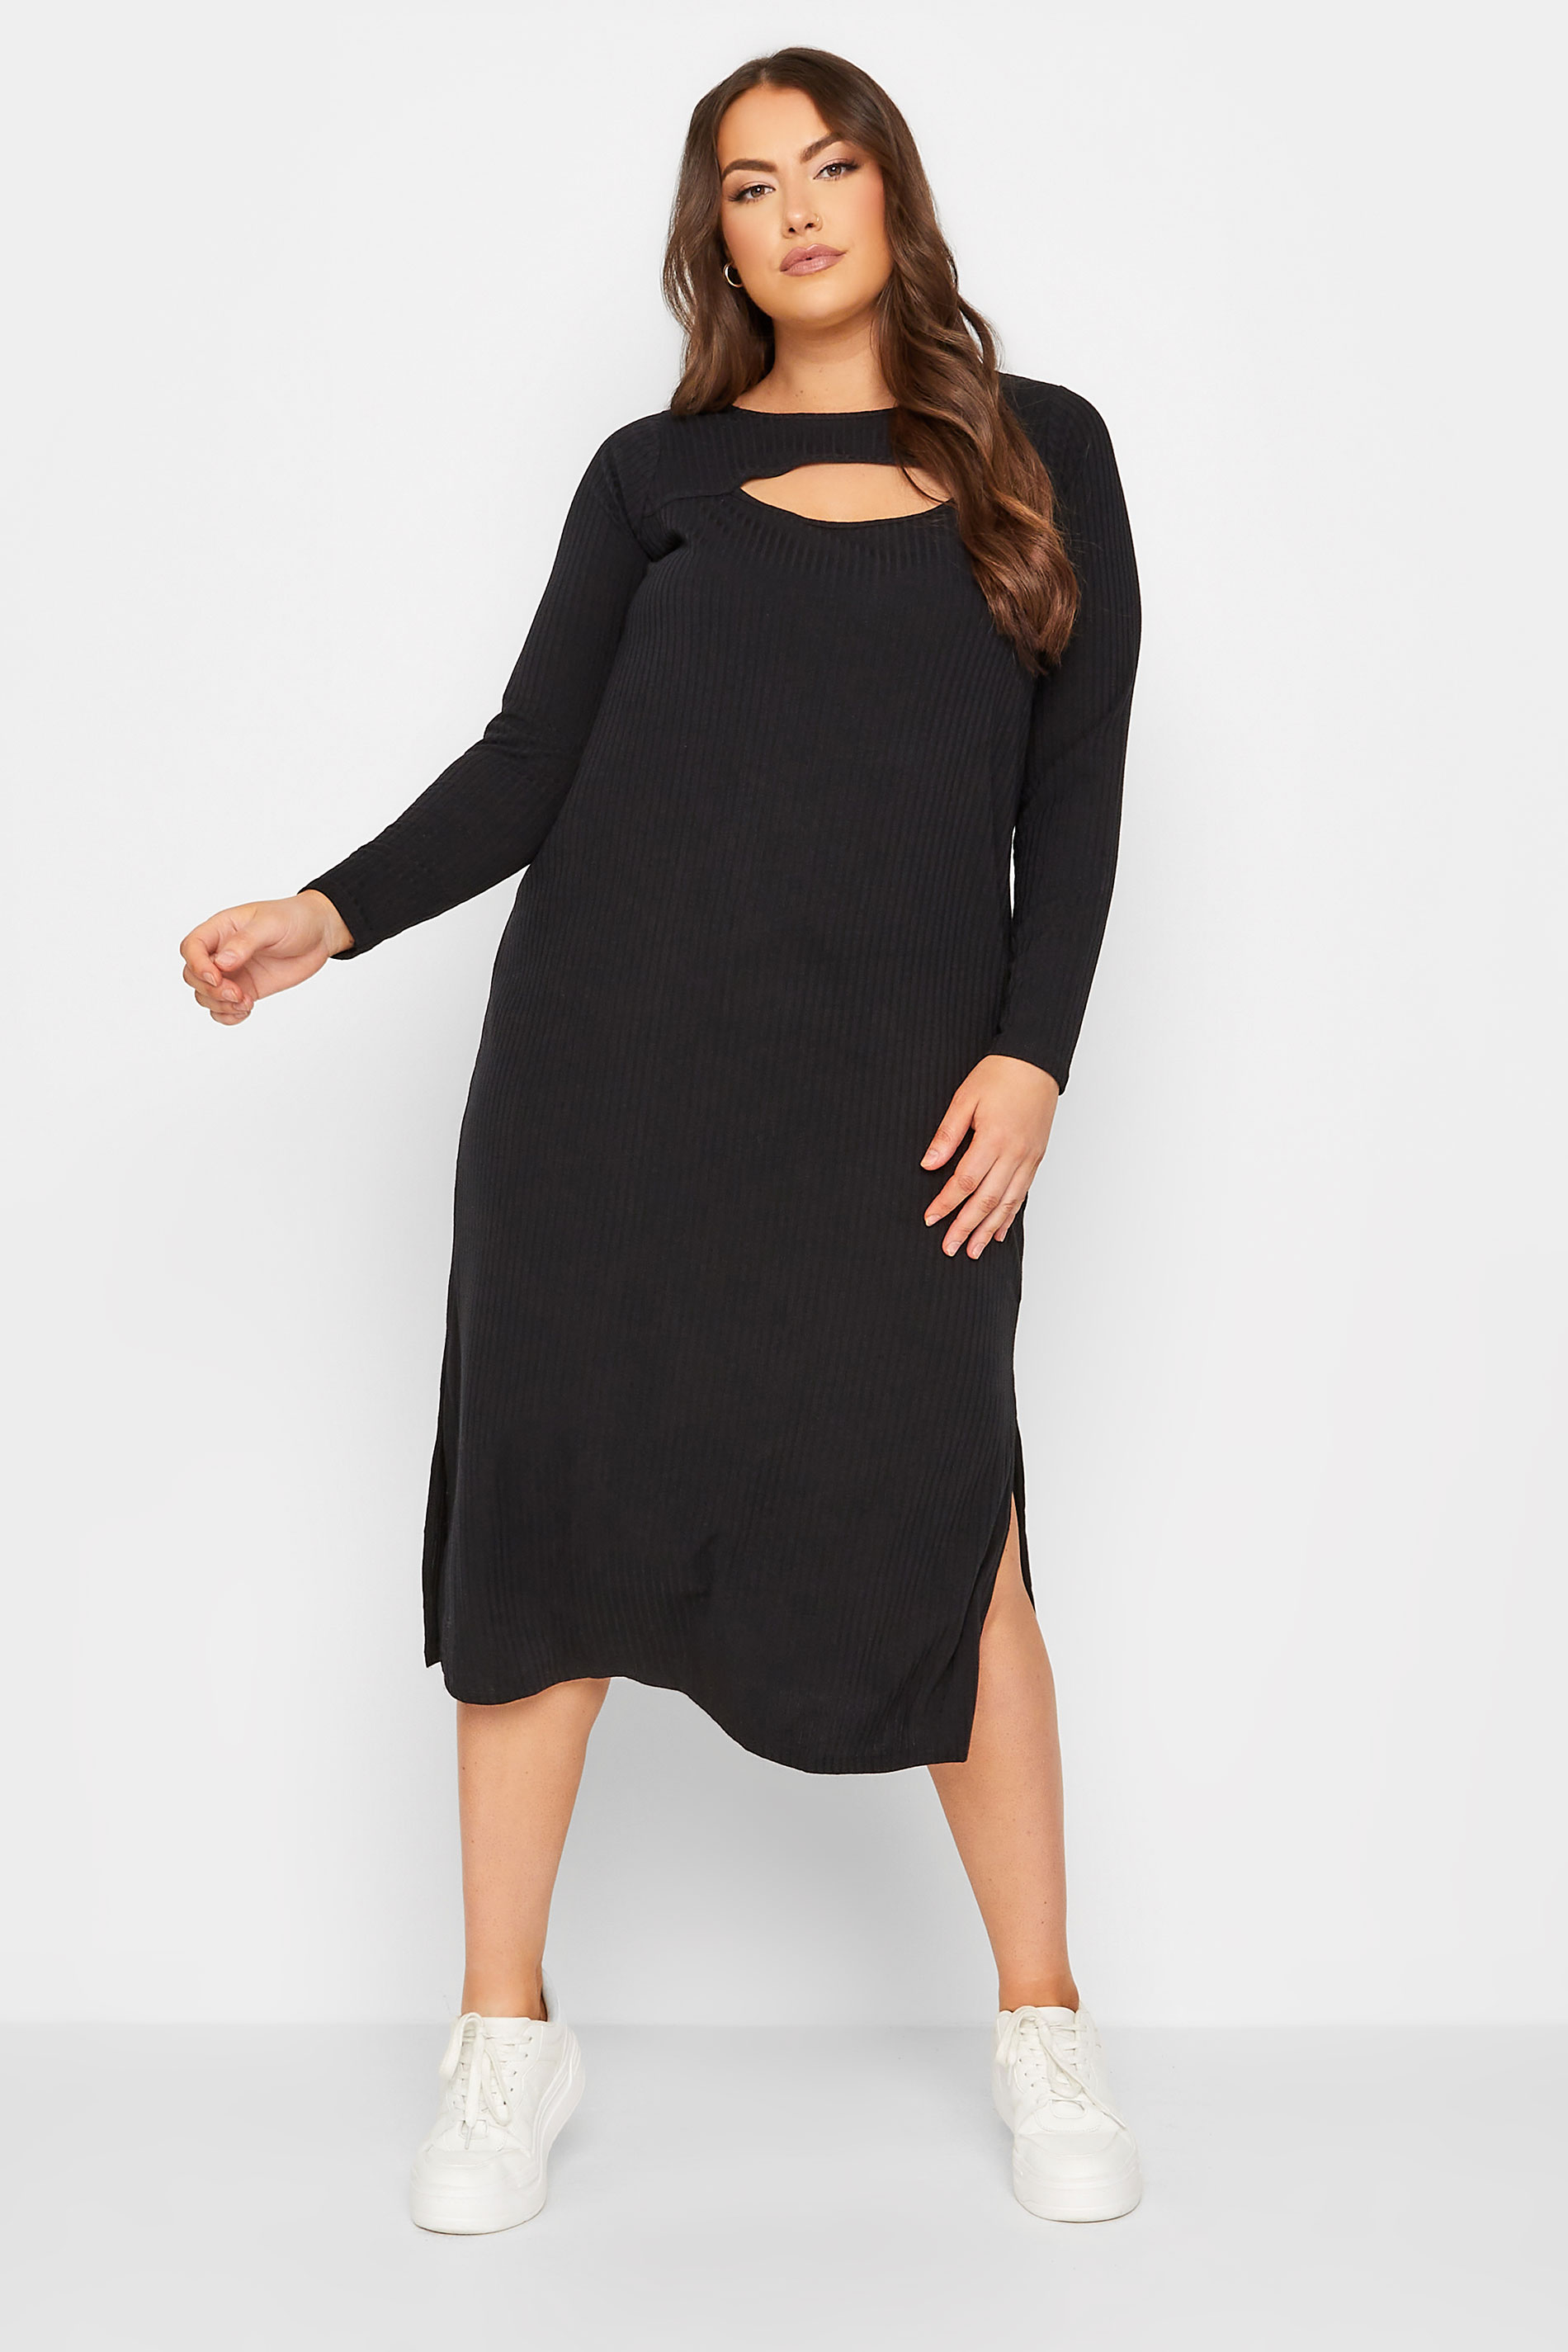 Plus Size Black Ribbed Cut Out Midaxi Dress | Yours Clothing 1